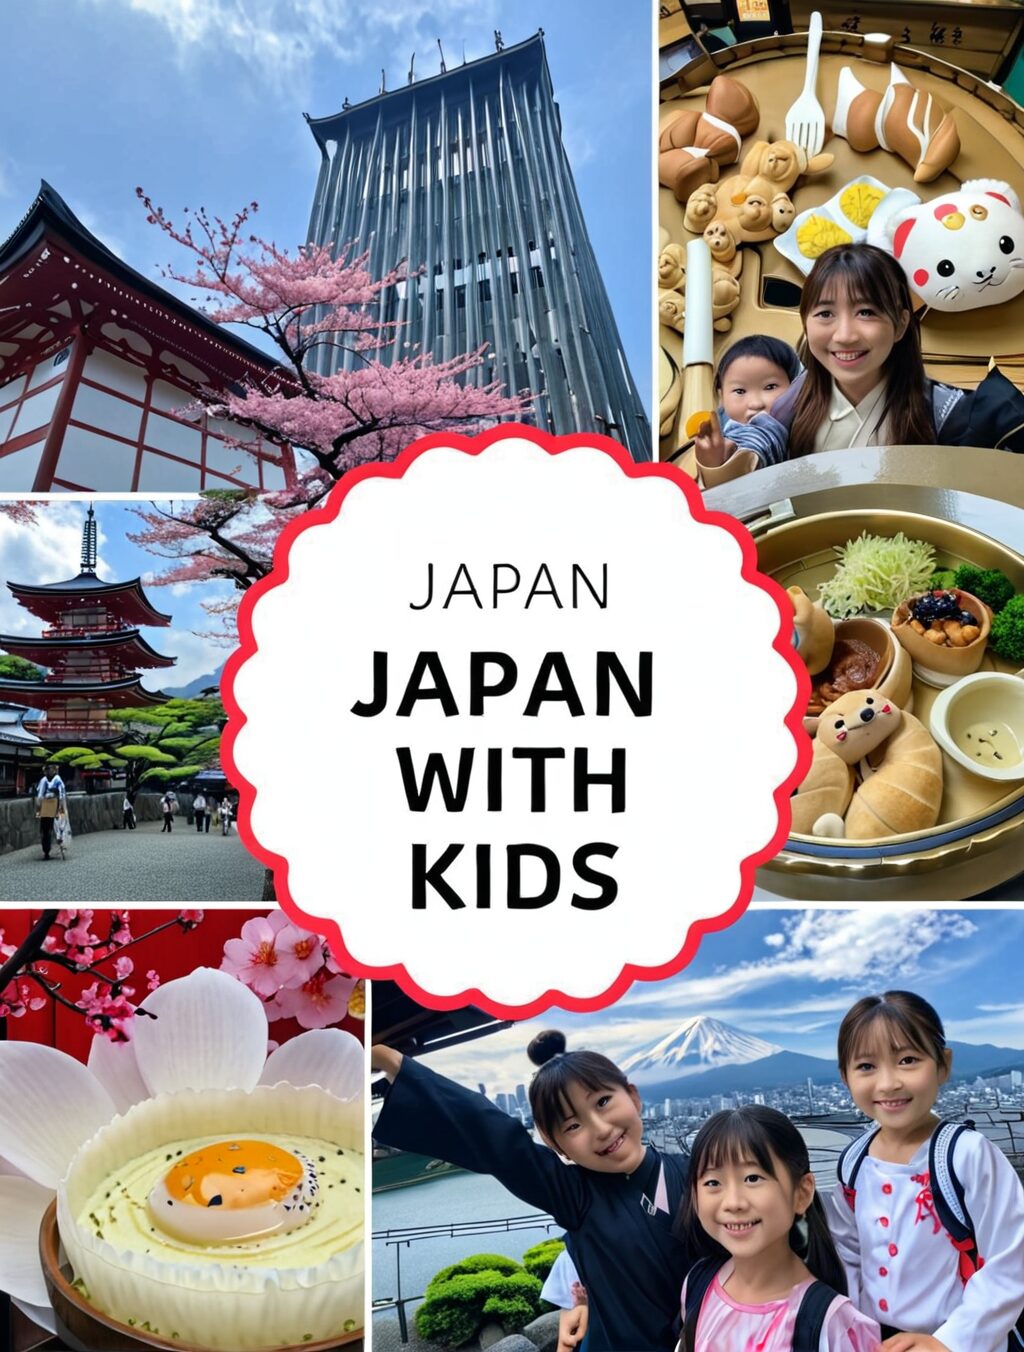 japan itinerary 7 days with kids